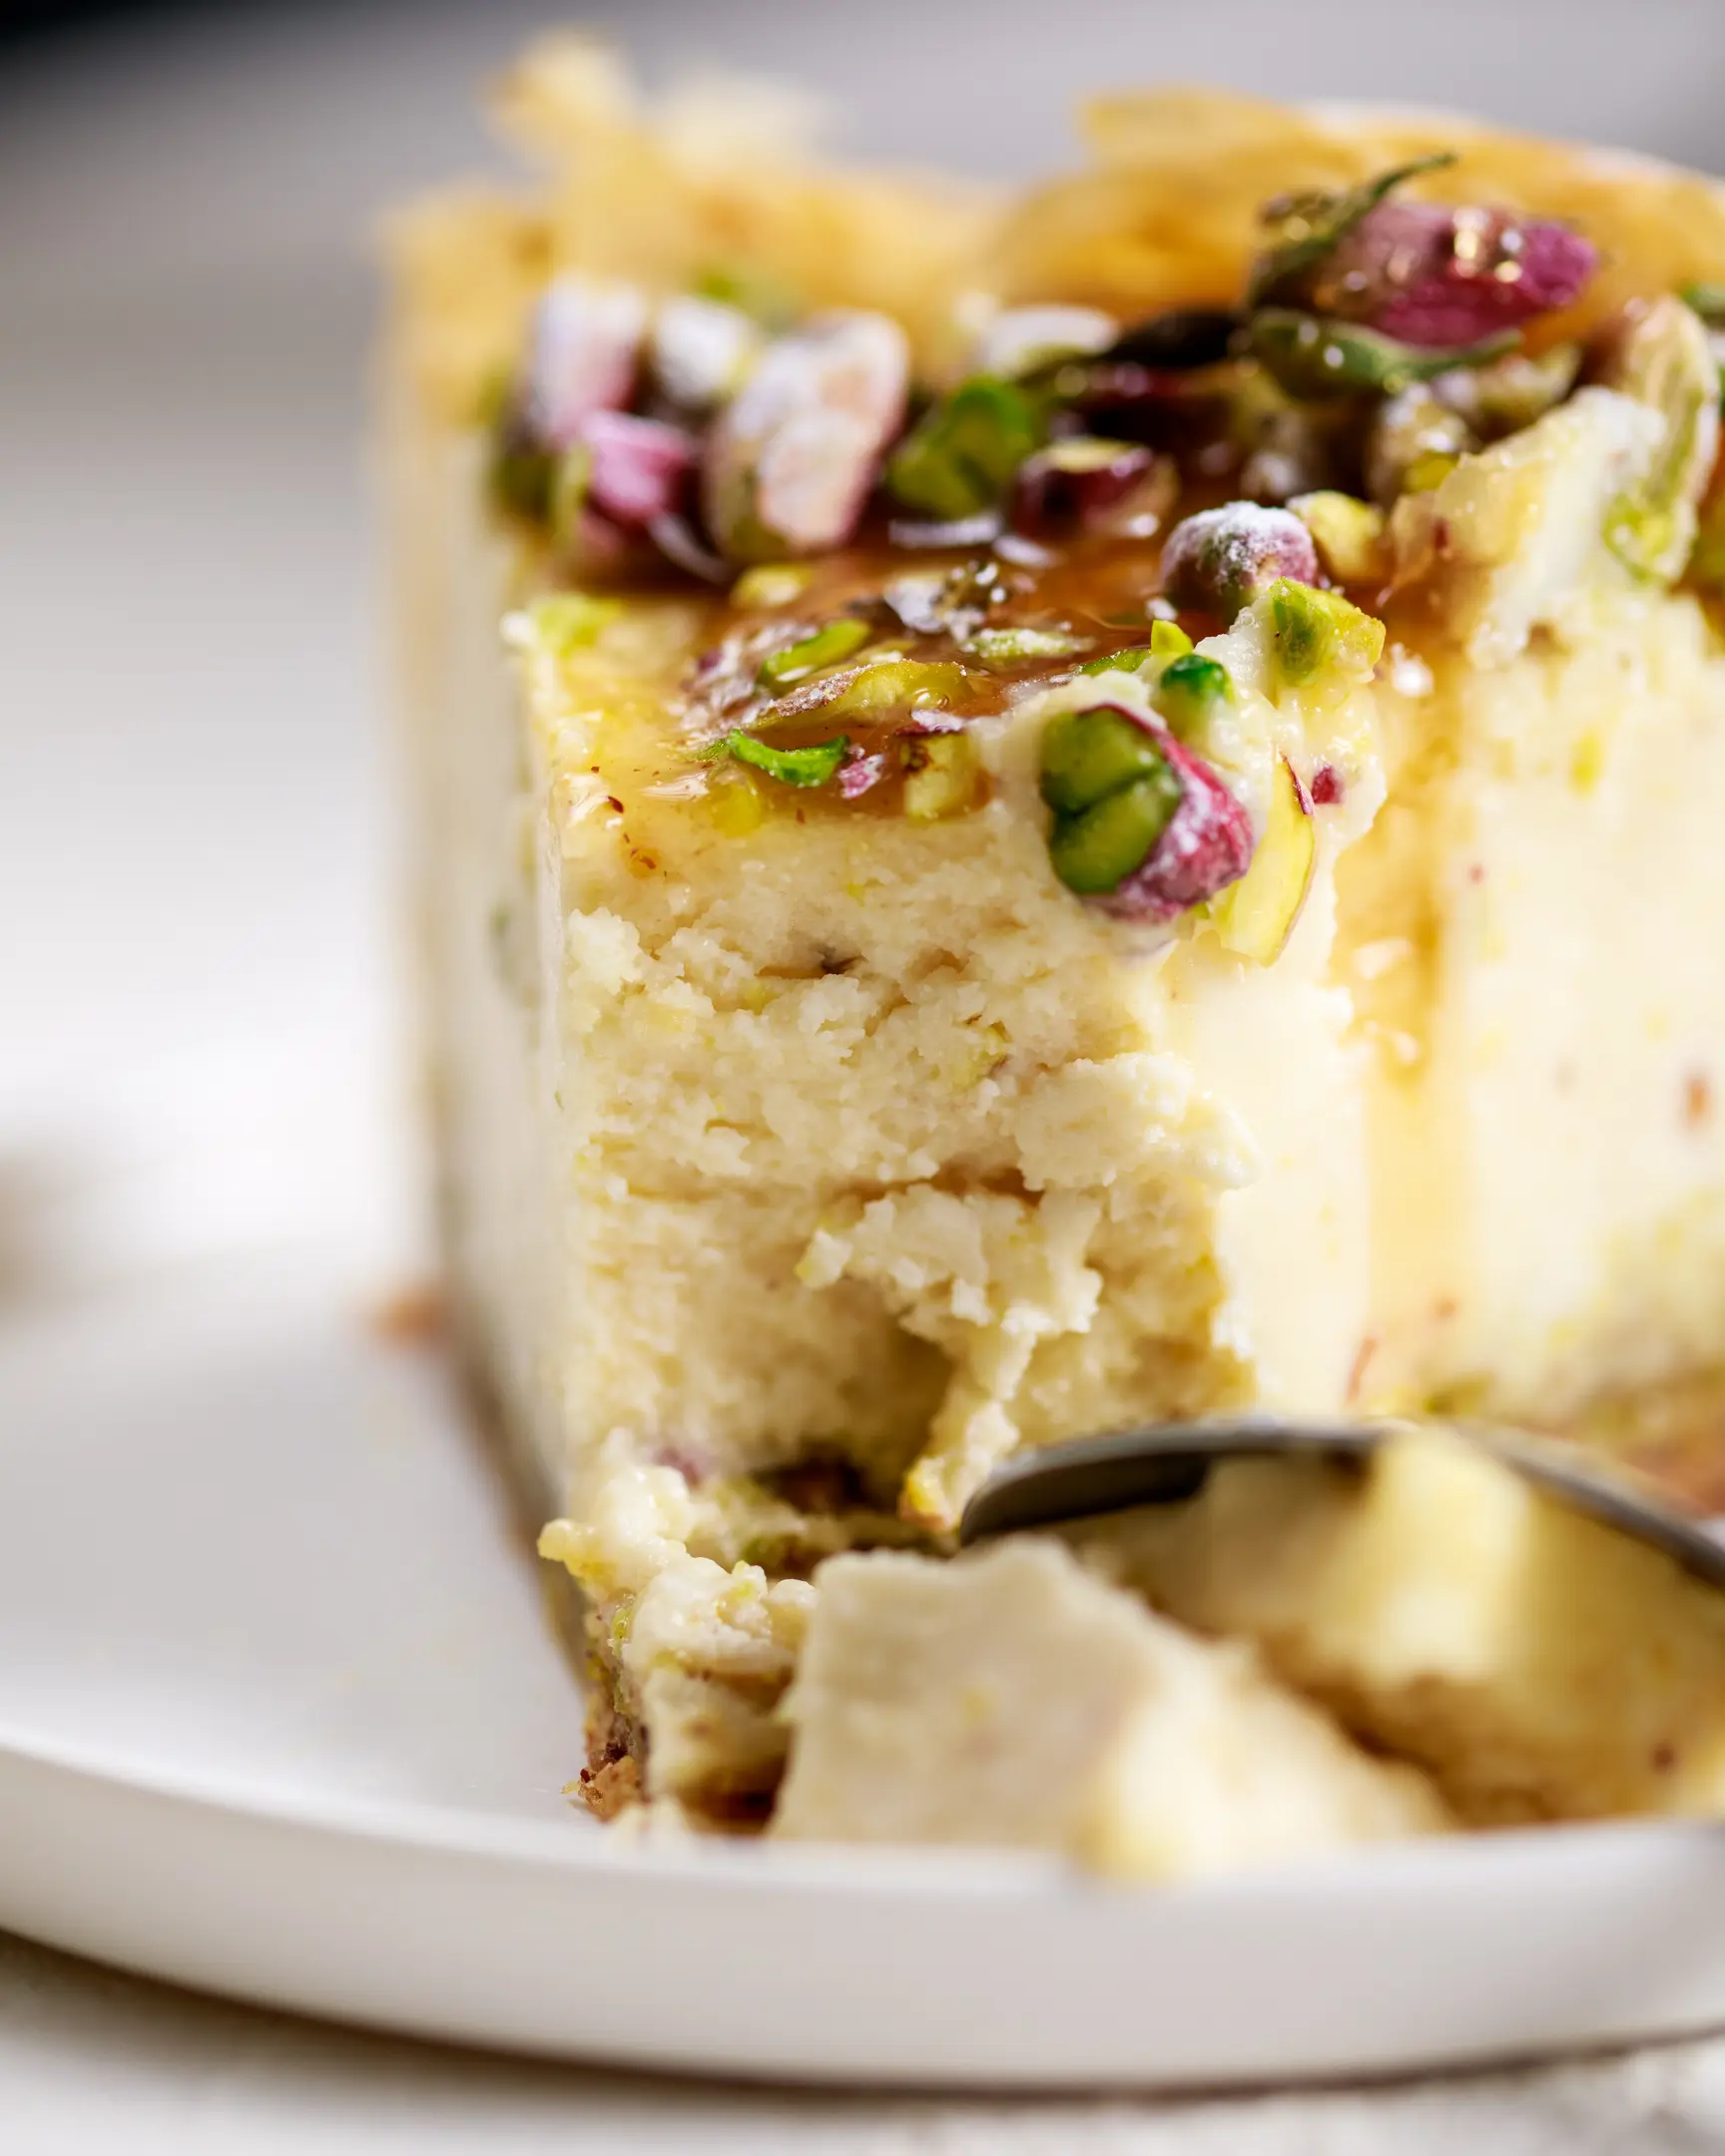 There is a piece of Baklava  cheesecake on the plate.  There is a piece of cheesecake on the plate. It is decorated with pistachio nuts. Cheesecake broken with a fork. The cheesecake texture is visible.